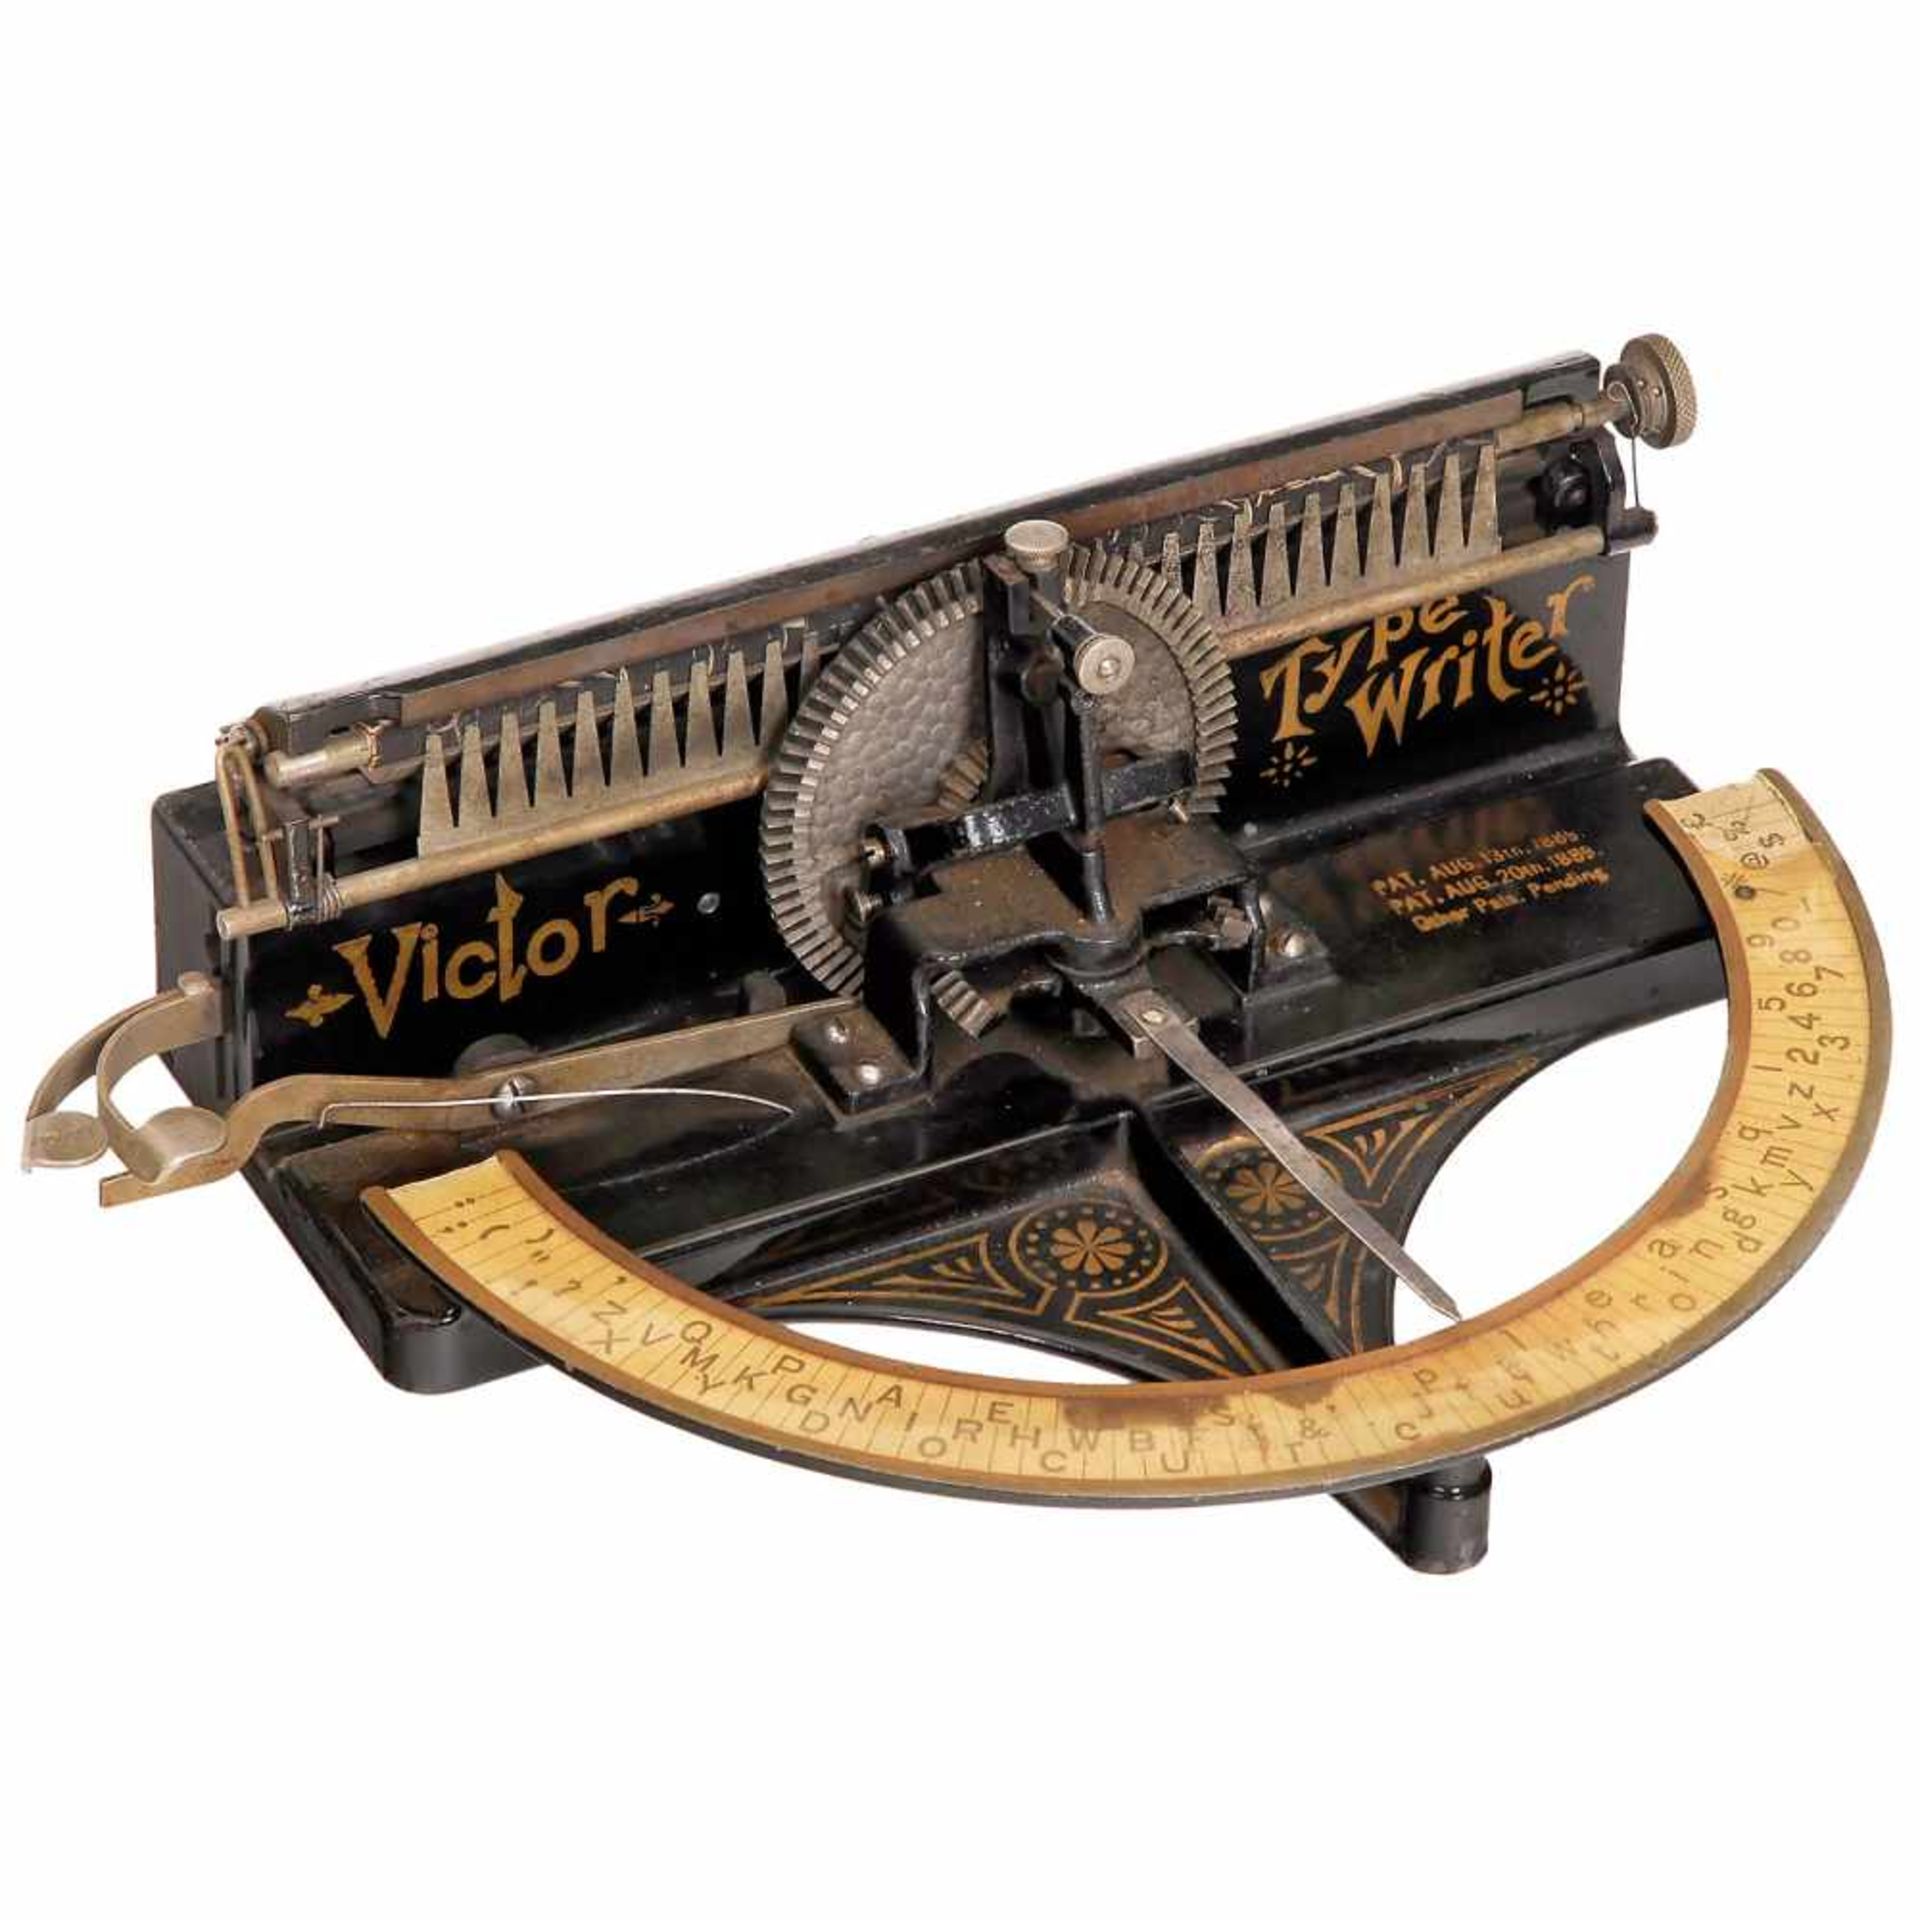 Victor Index Typewriter, 1889Manufactured by Tilton Manufacturing Company, Boston, serial no.